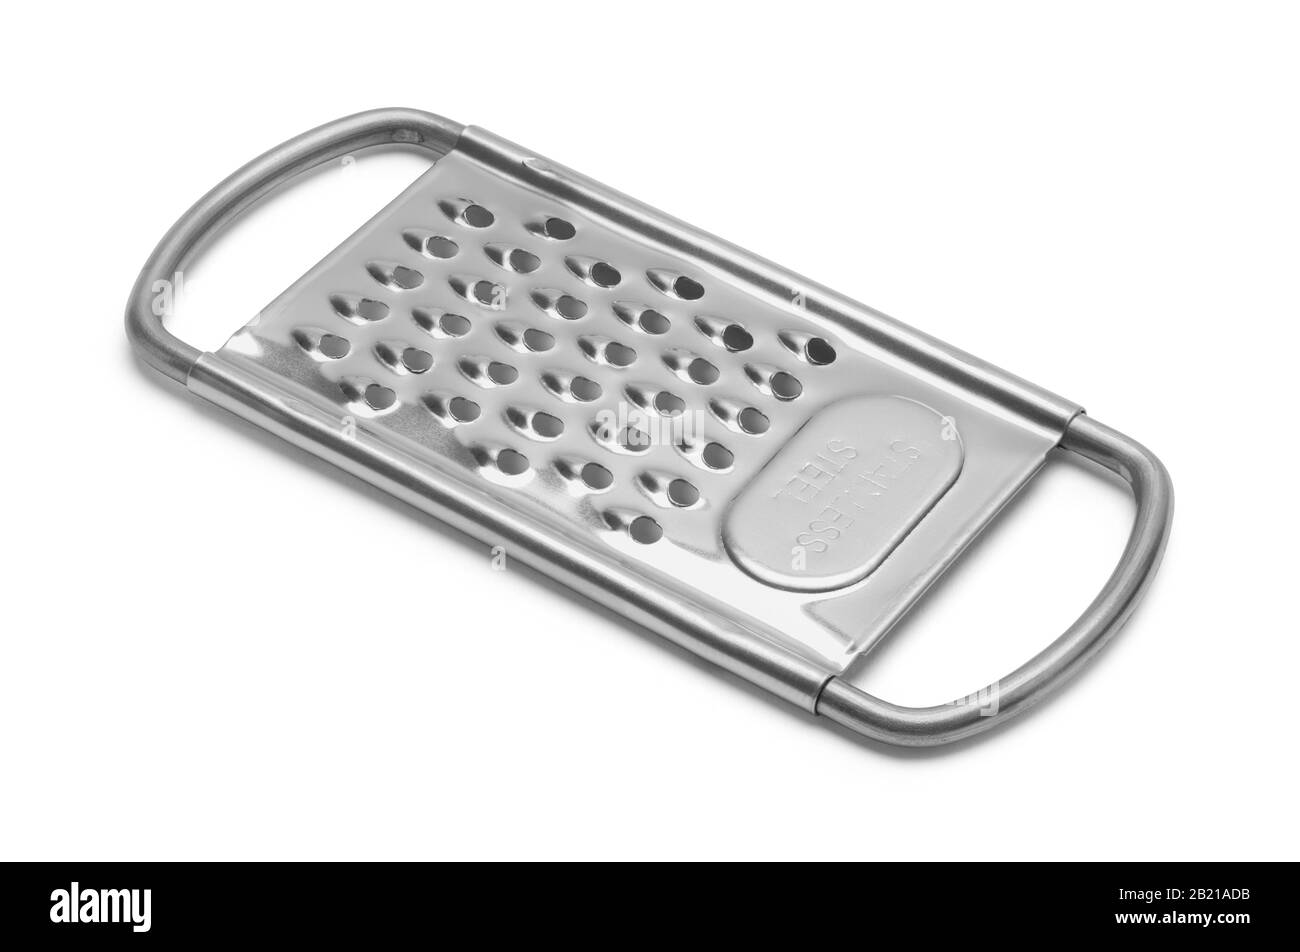 Small Metal Grater Isolated on White Background. Stock Photo